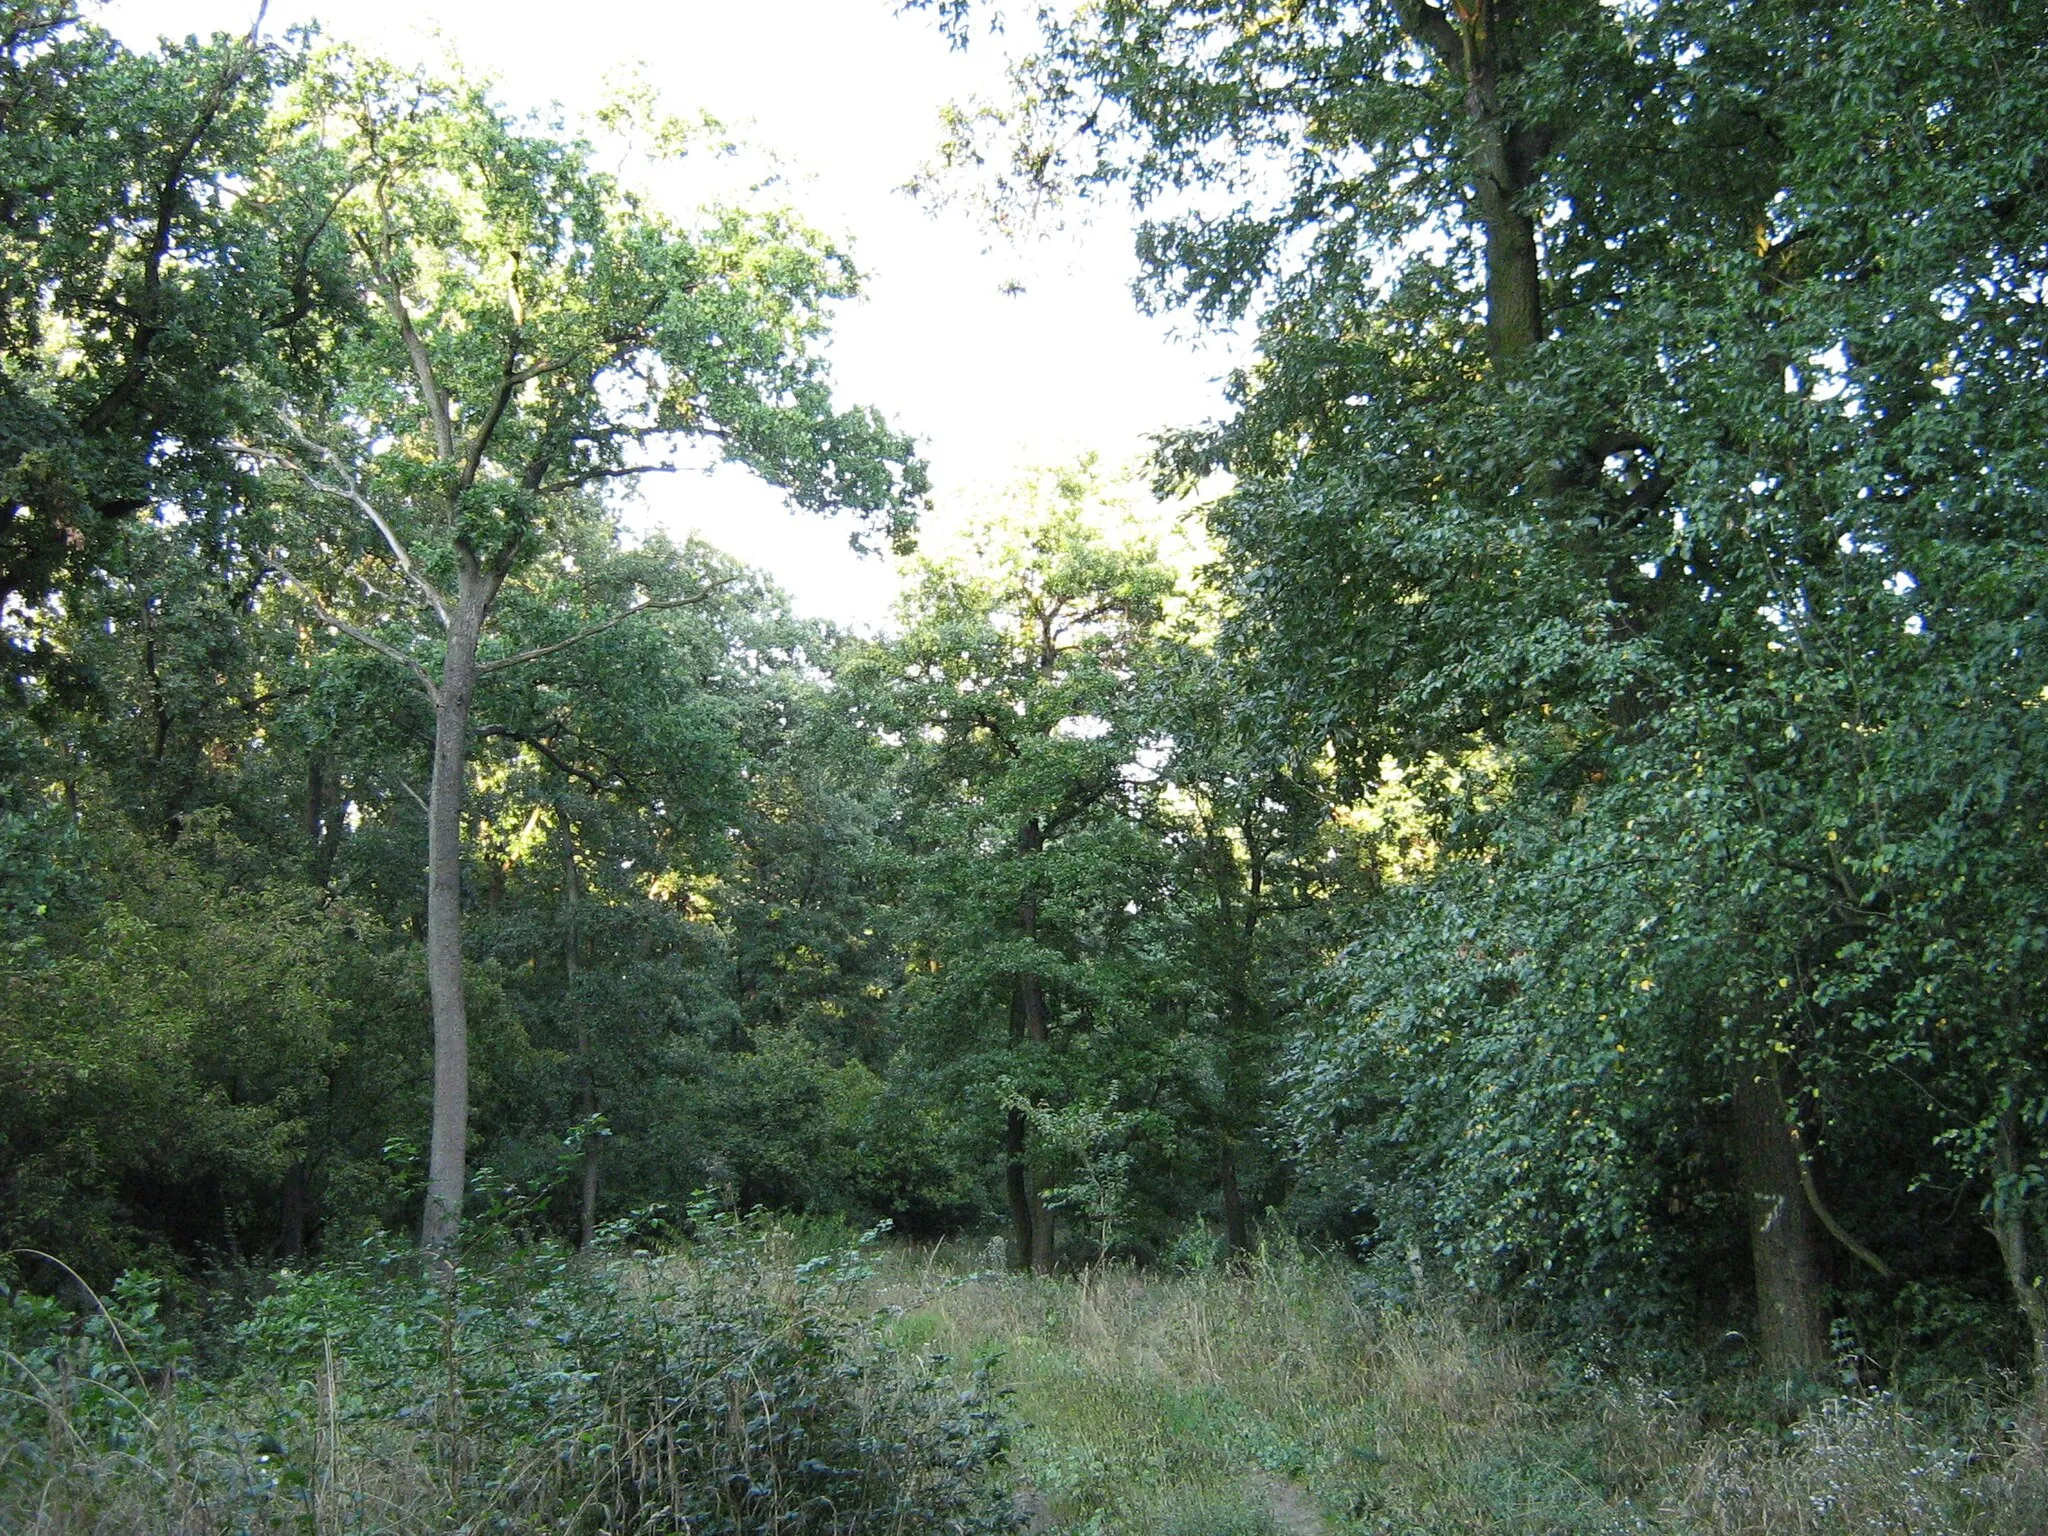 Photo showing: 'Aceri tatarico quercetum' The most characteristic native type of plain forests in Hungary. Nearly extinct ecological association.